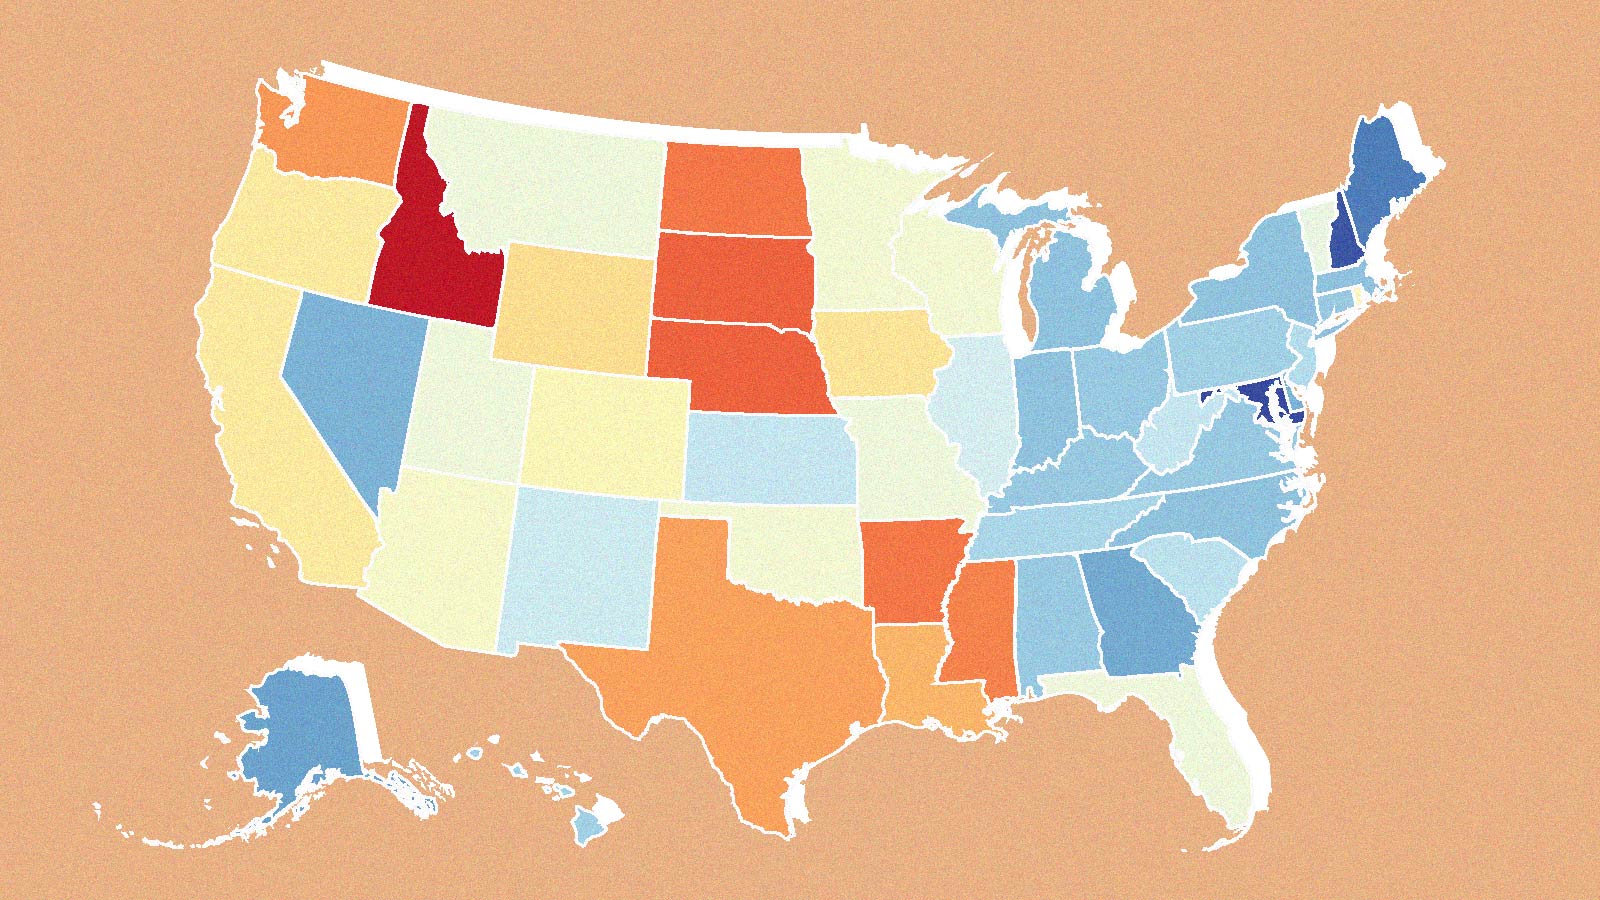 A map of US states by percent change in carbon dioxide emissions